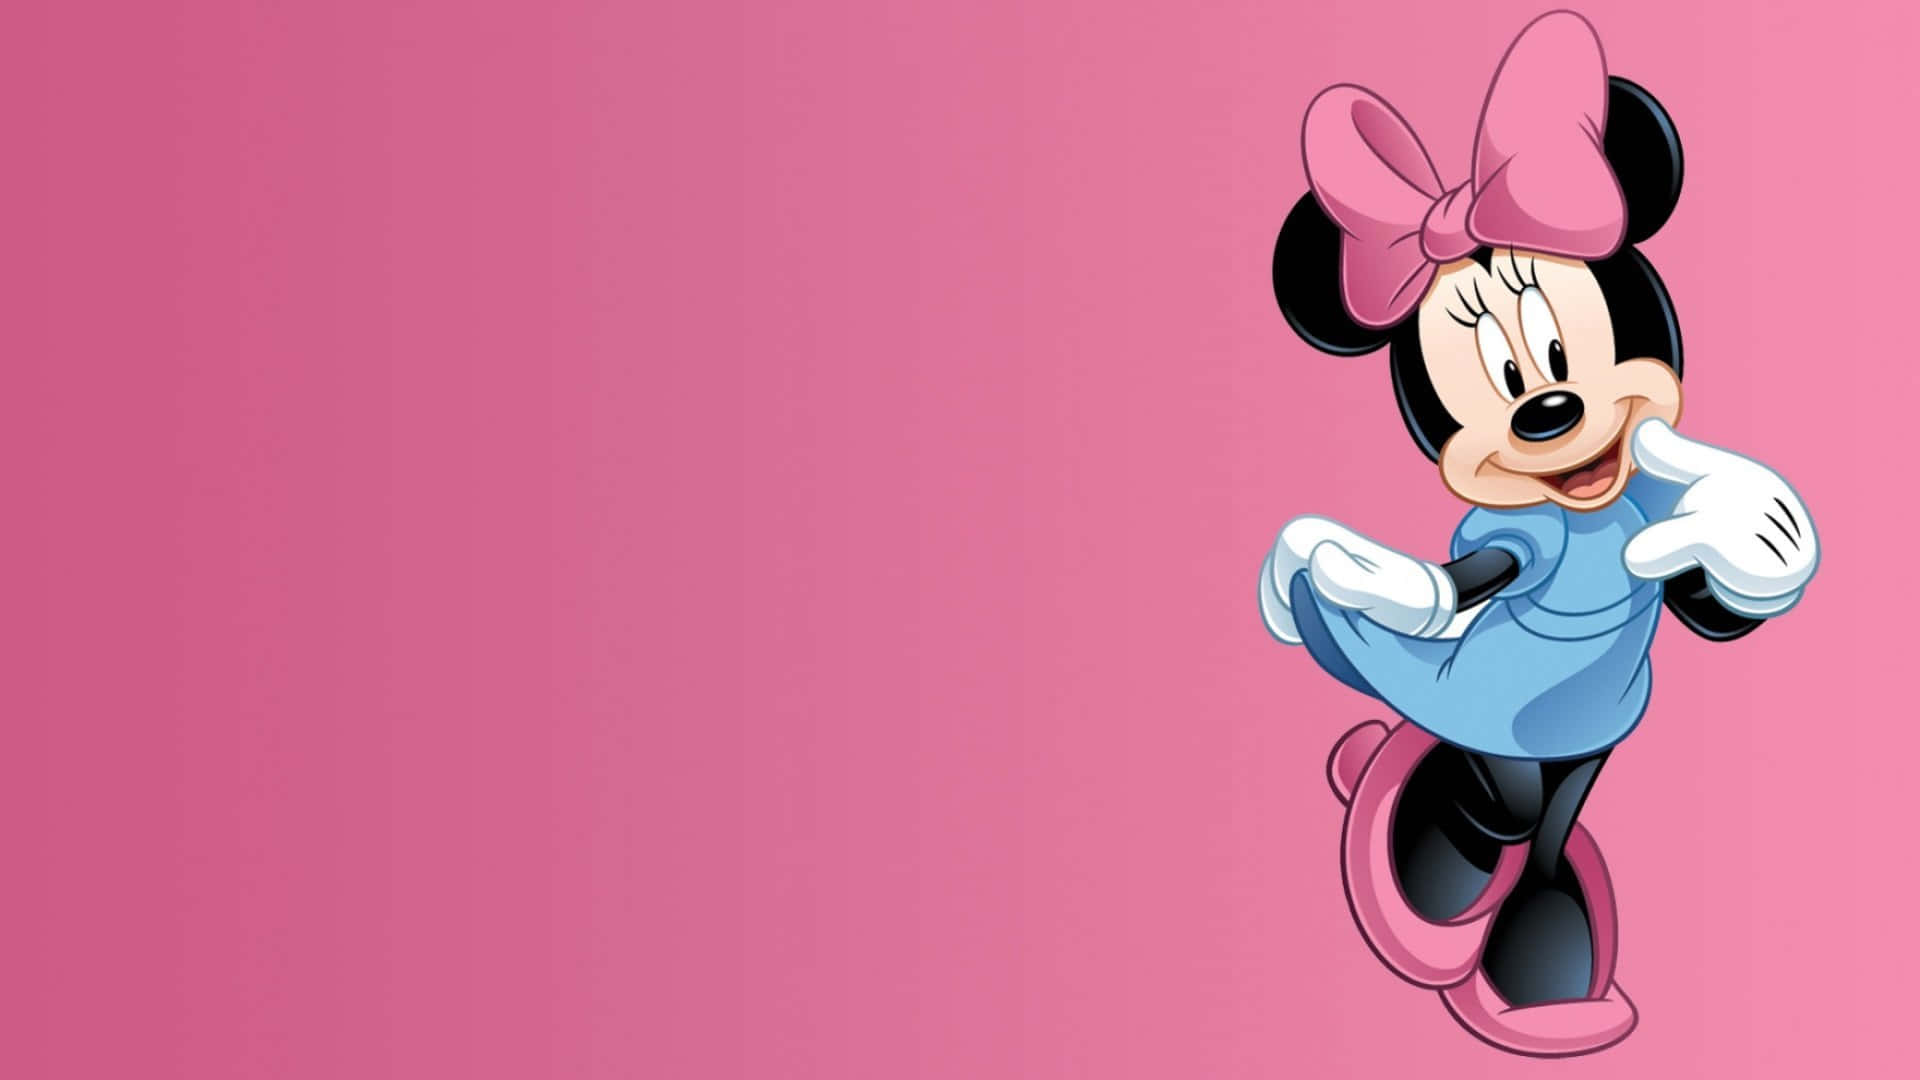 Minnie Mouse Looking Cute In Her Pink Ensemble. Wallpaper